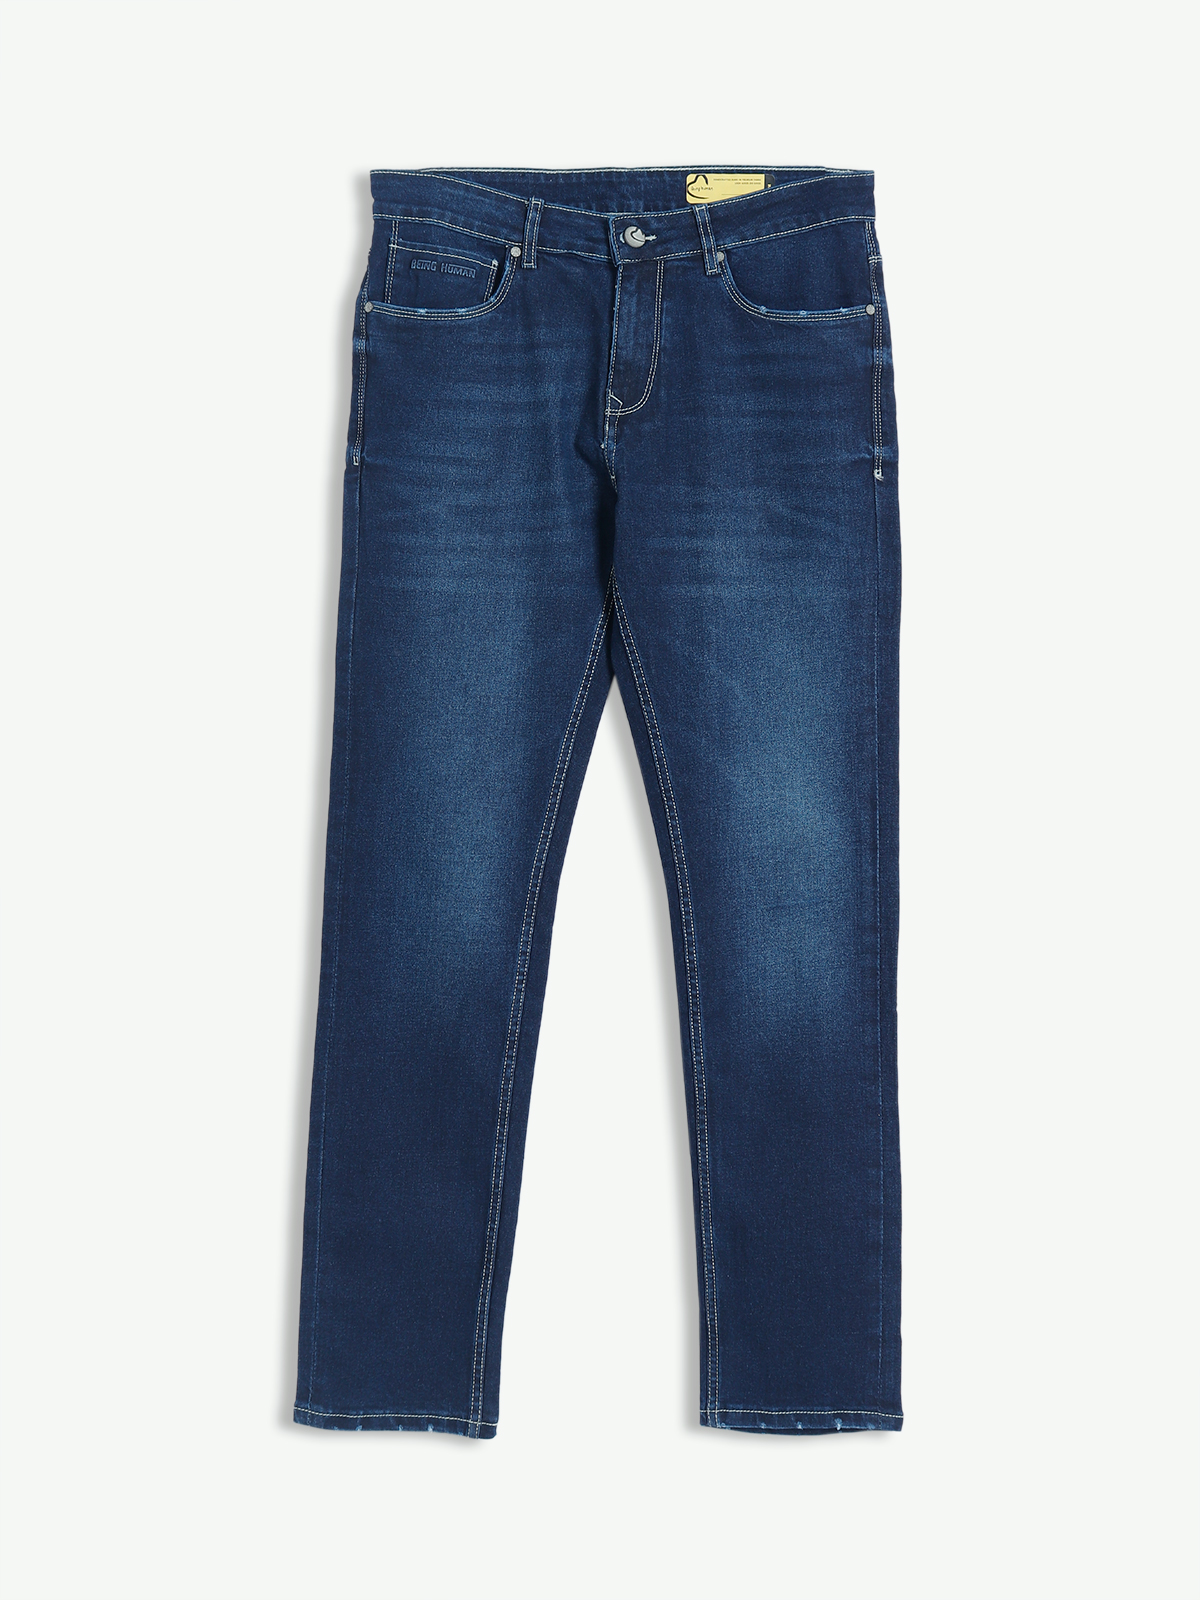 Buy Being Human Grey Super Skinny Fit Jeans for Mens Online @ Tata CLiQ